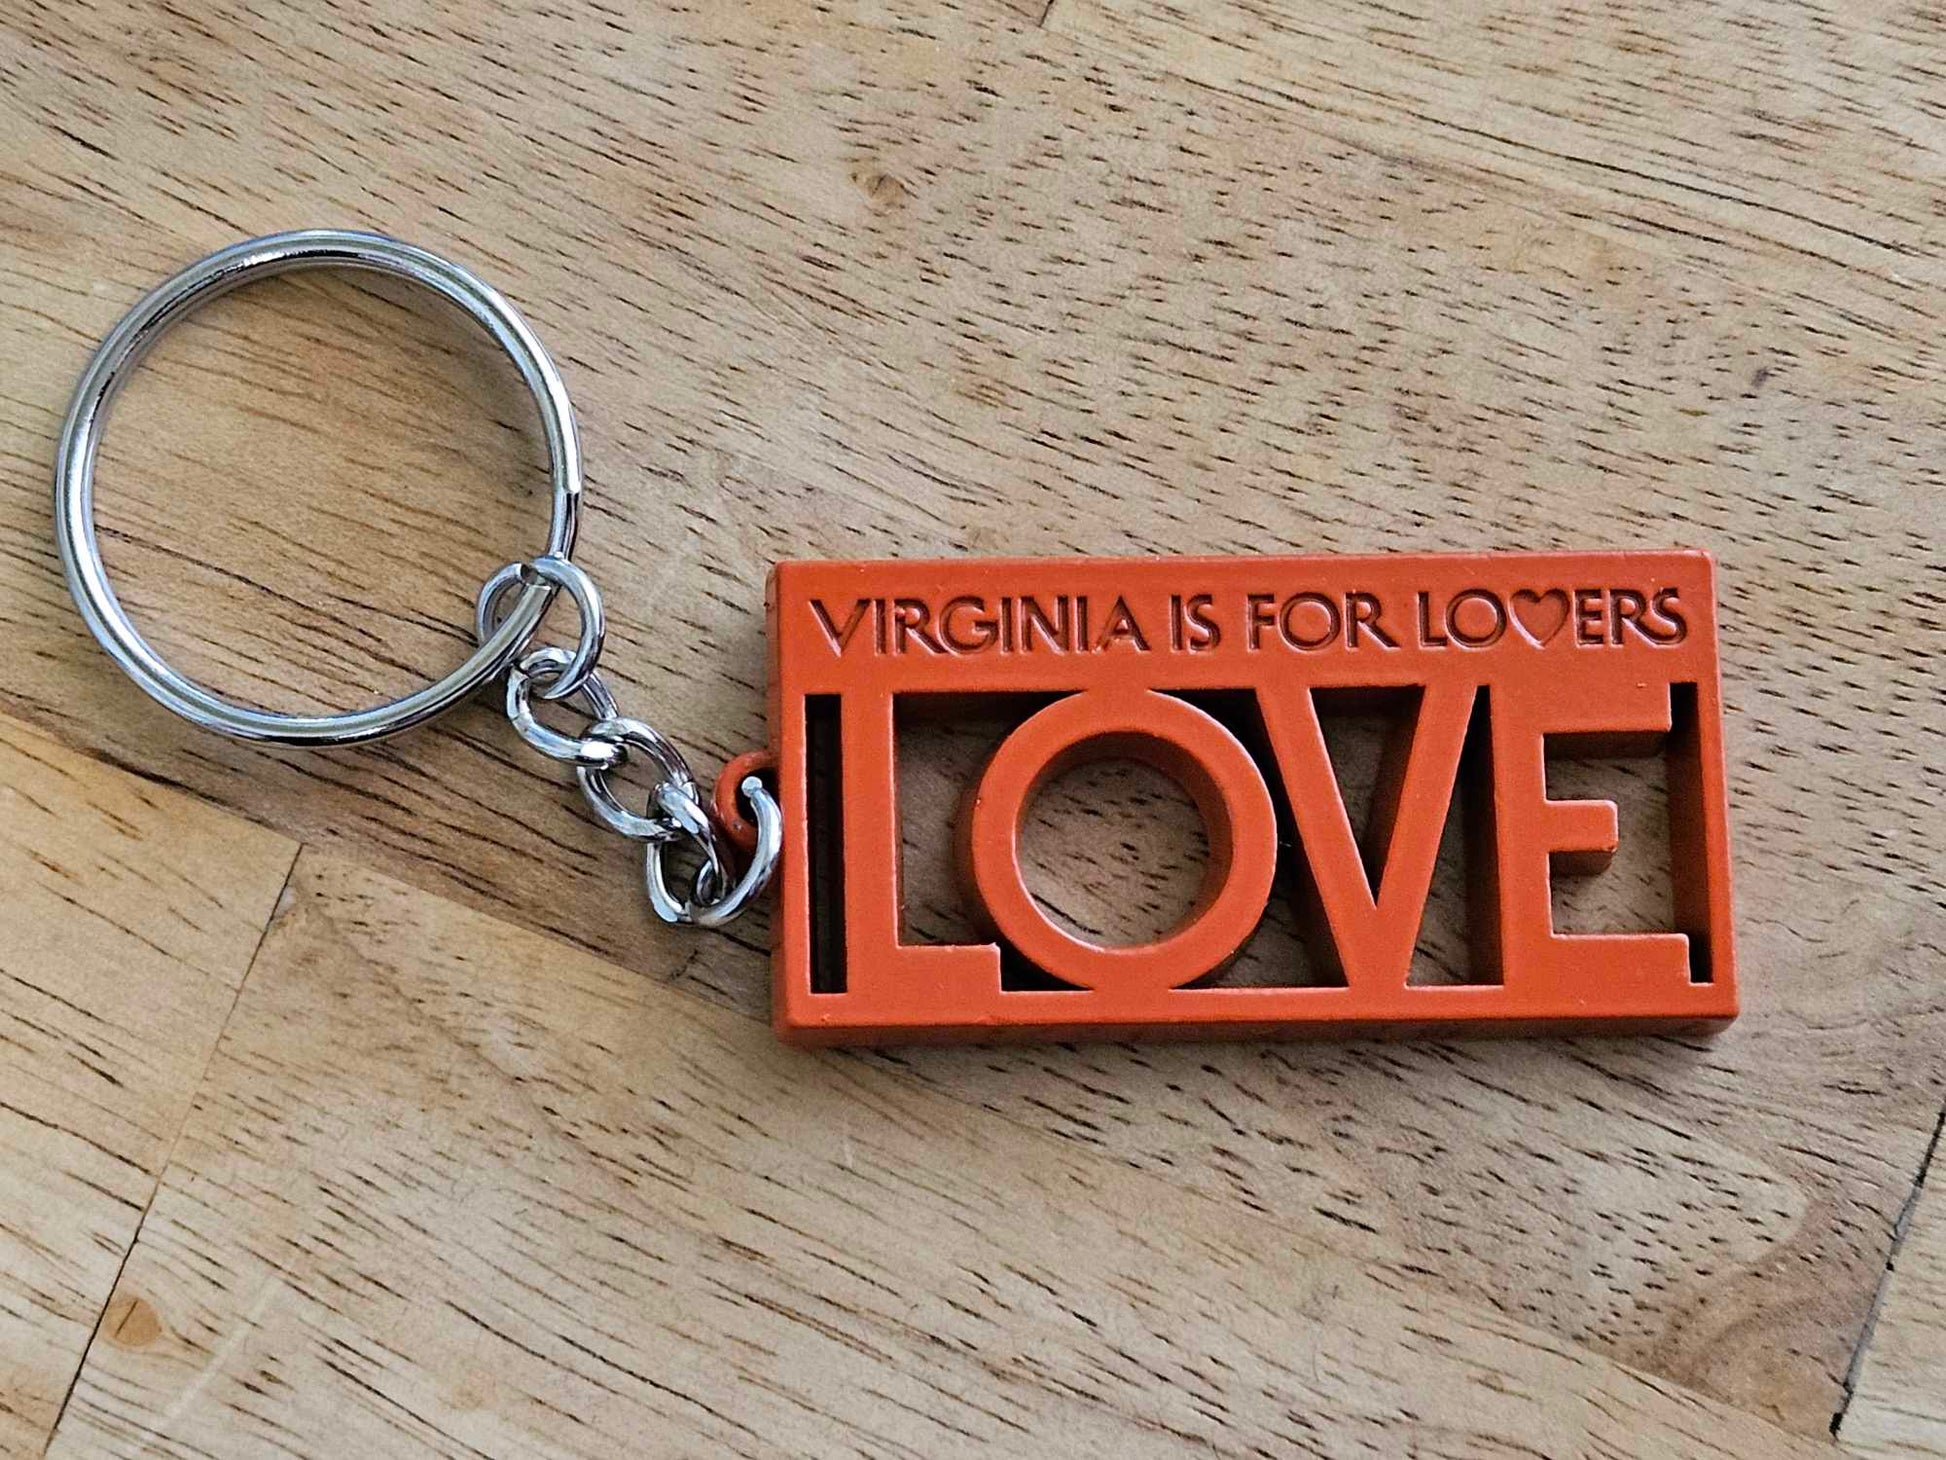 Virginia is For Lovers LOVE Keychain - Dusty's Country Store